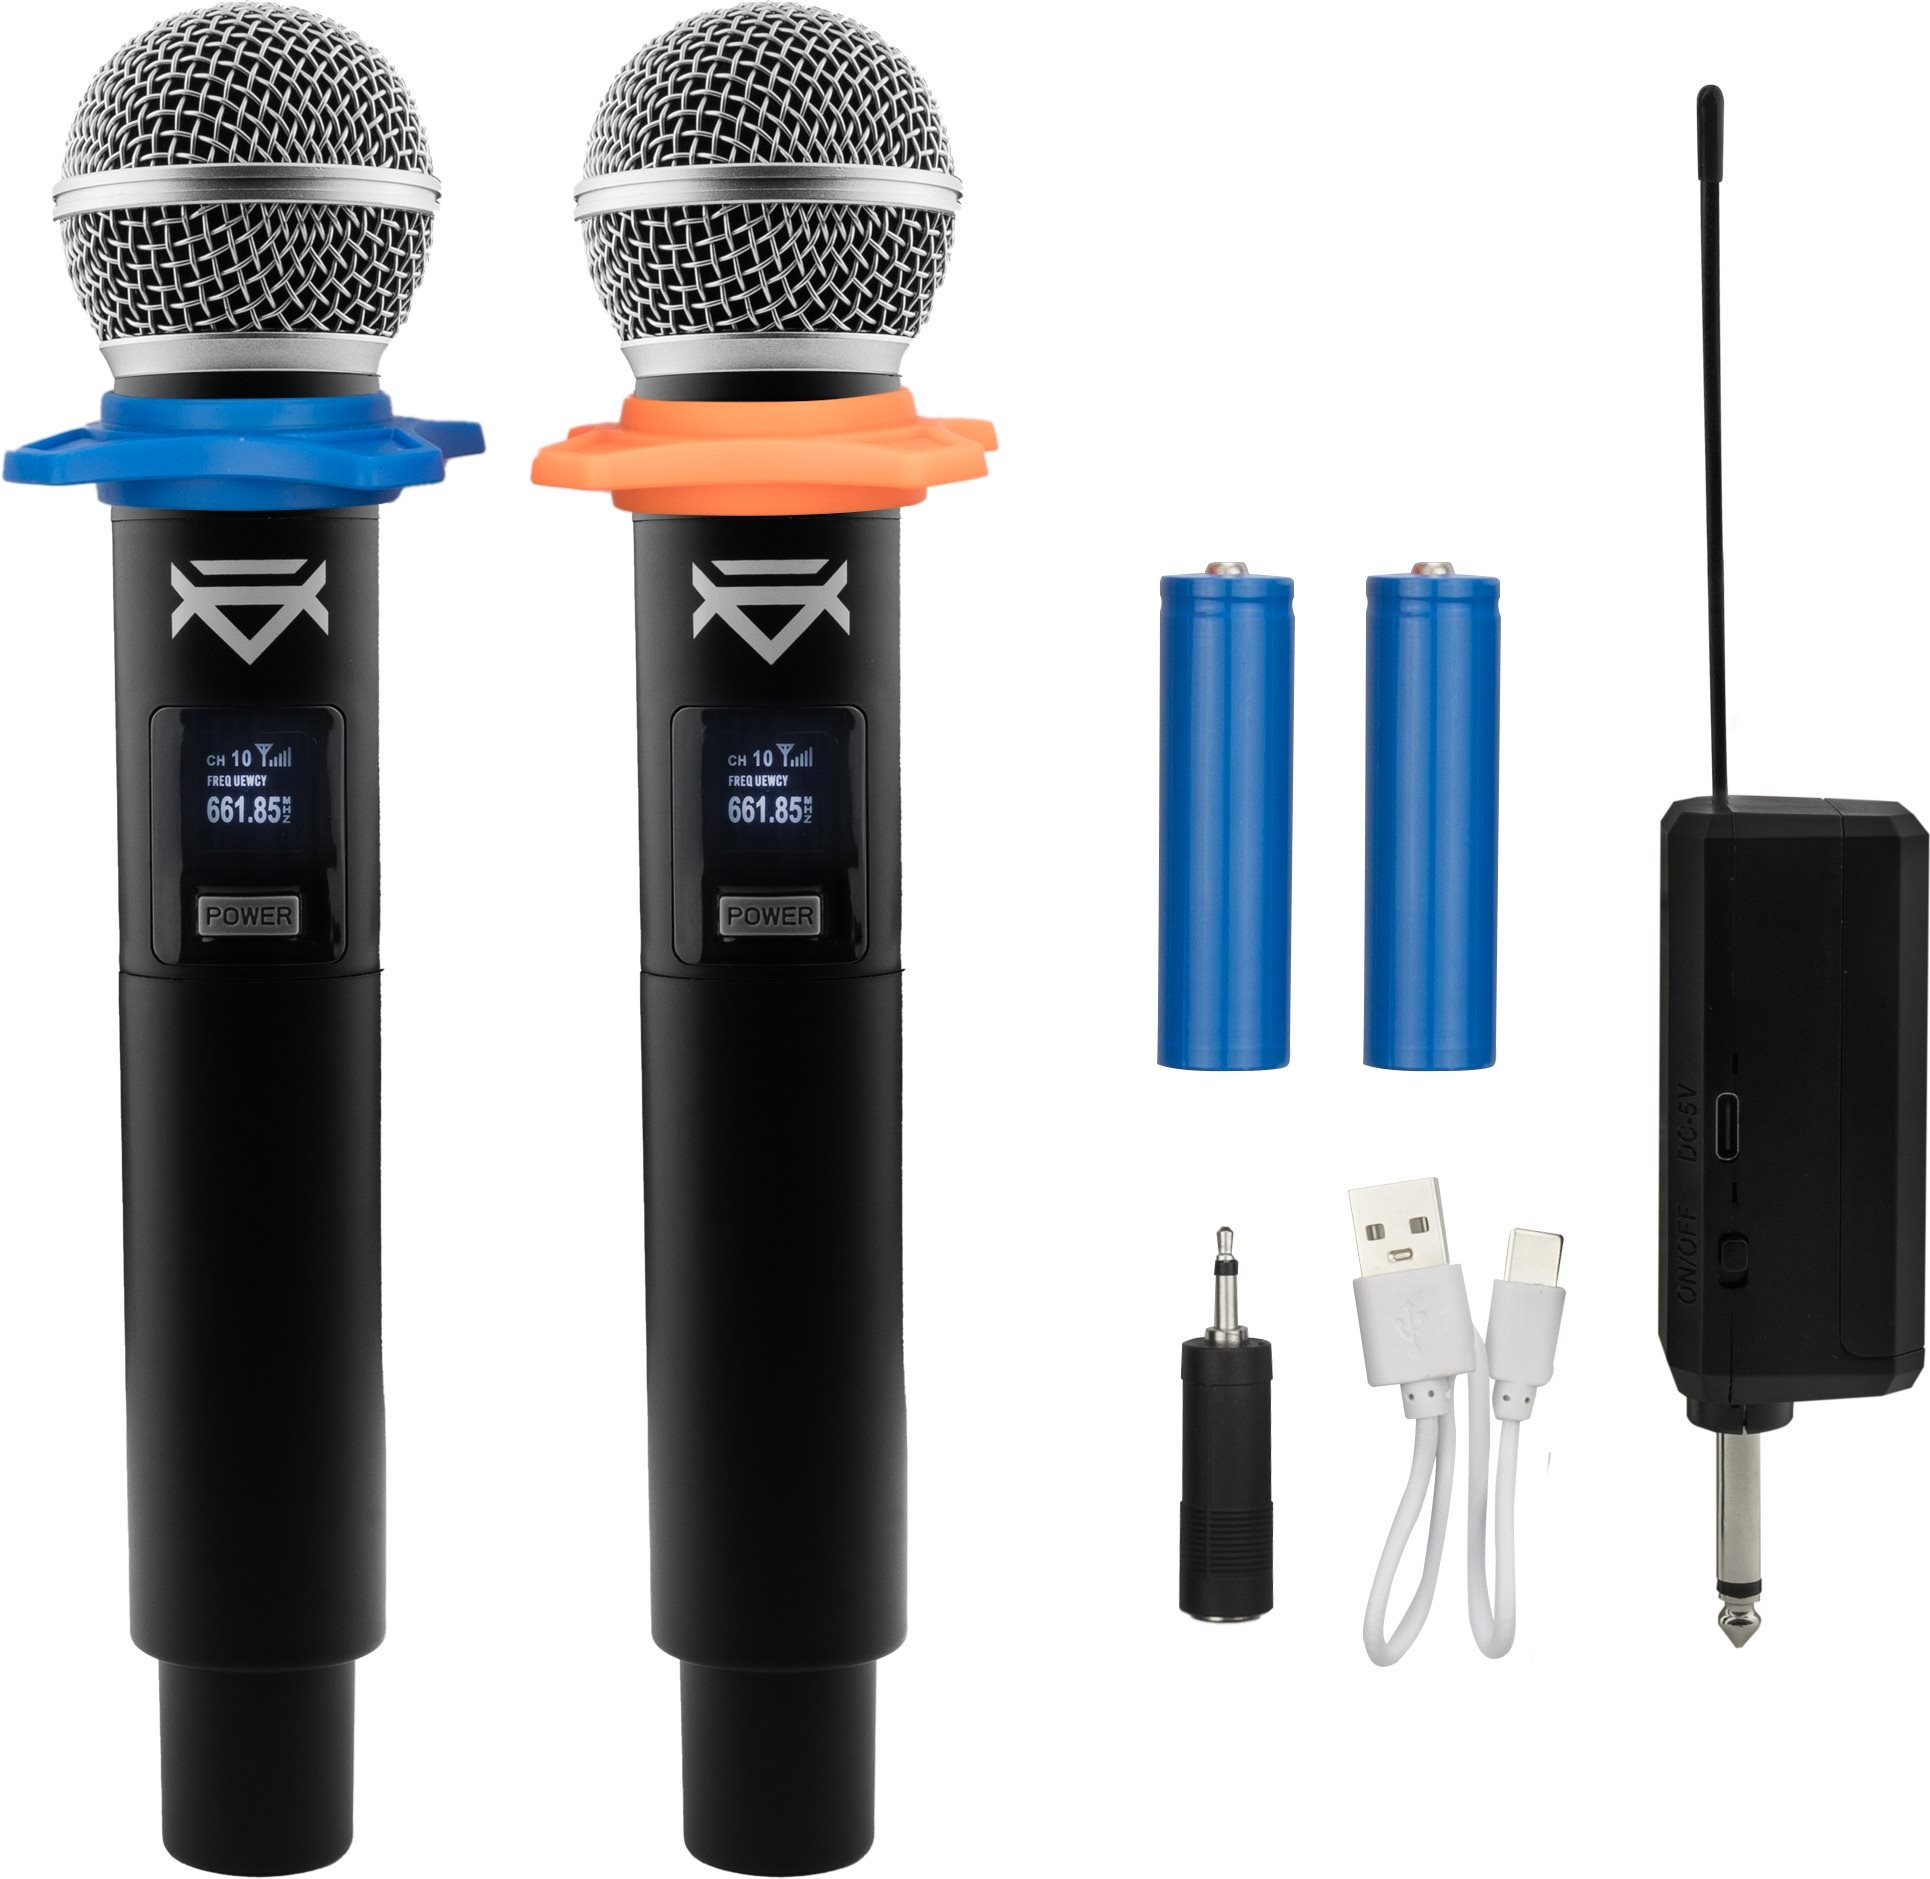 Veles-X Dual Wireless Handheld Microphone Party Karaoke System with Receiver